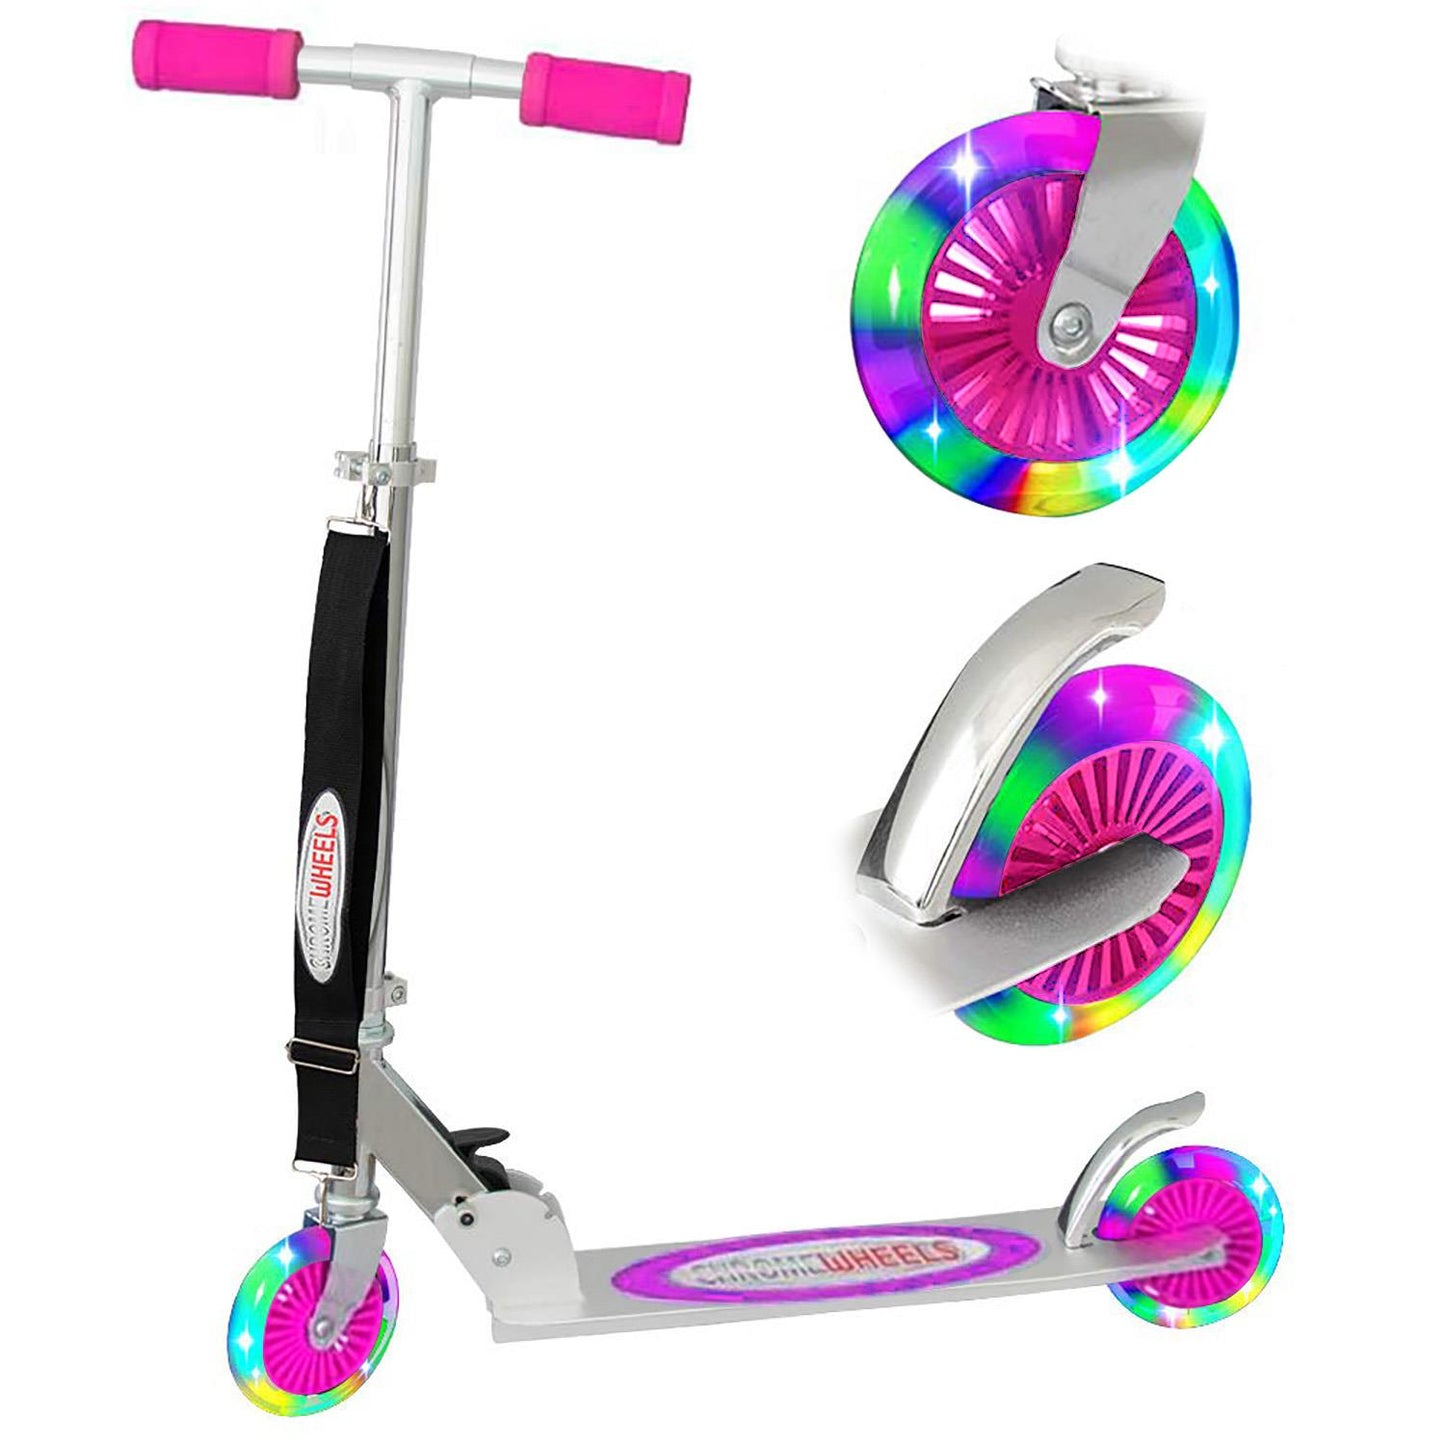 Foldable Kids Scooter Pink by The Magic Toy Shop - UKBuyZone